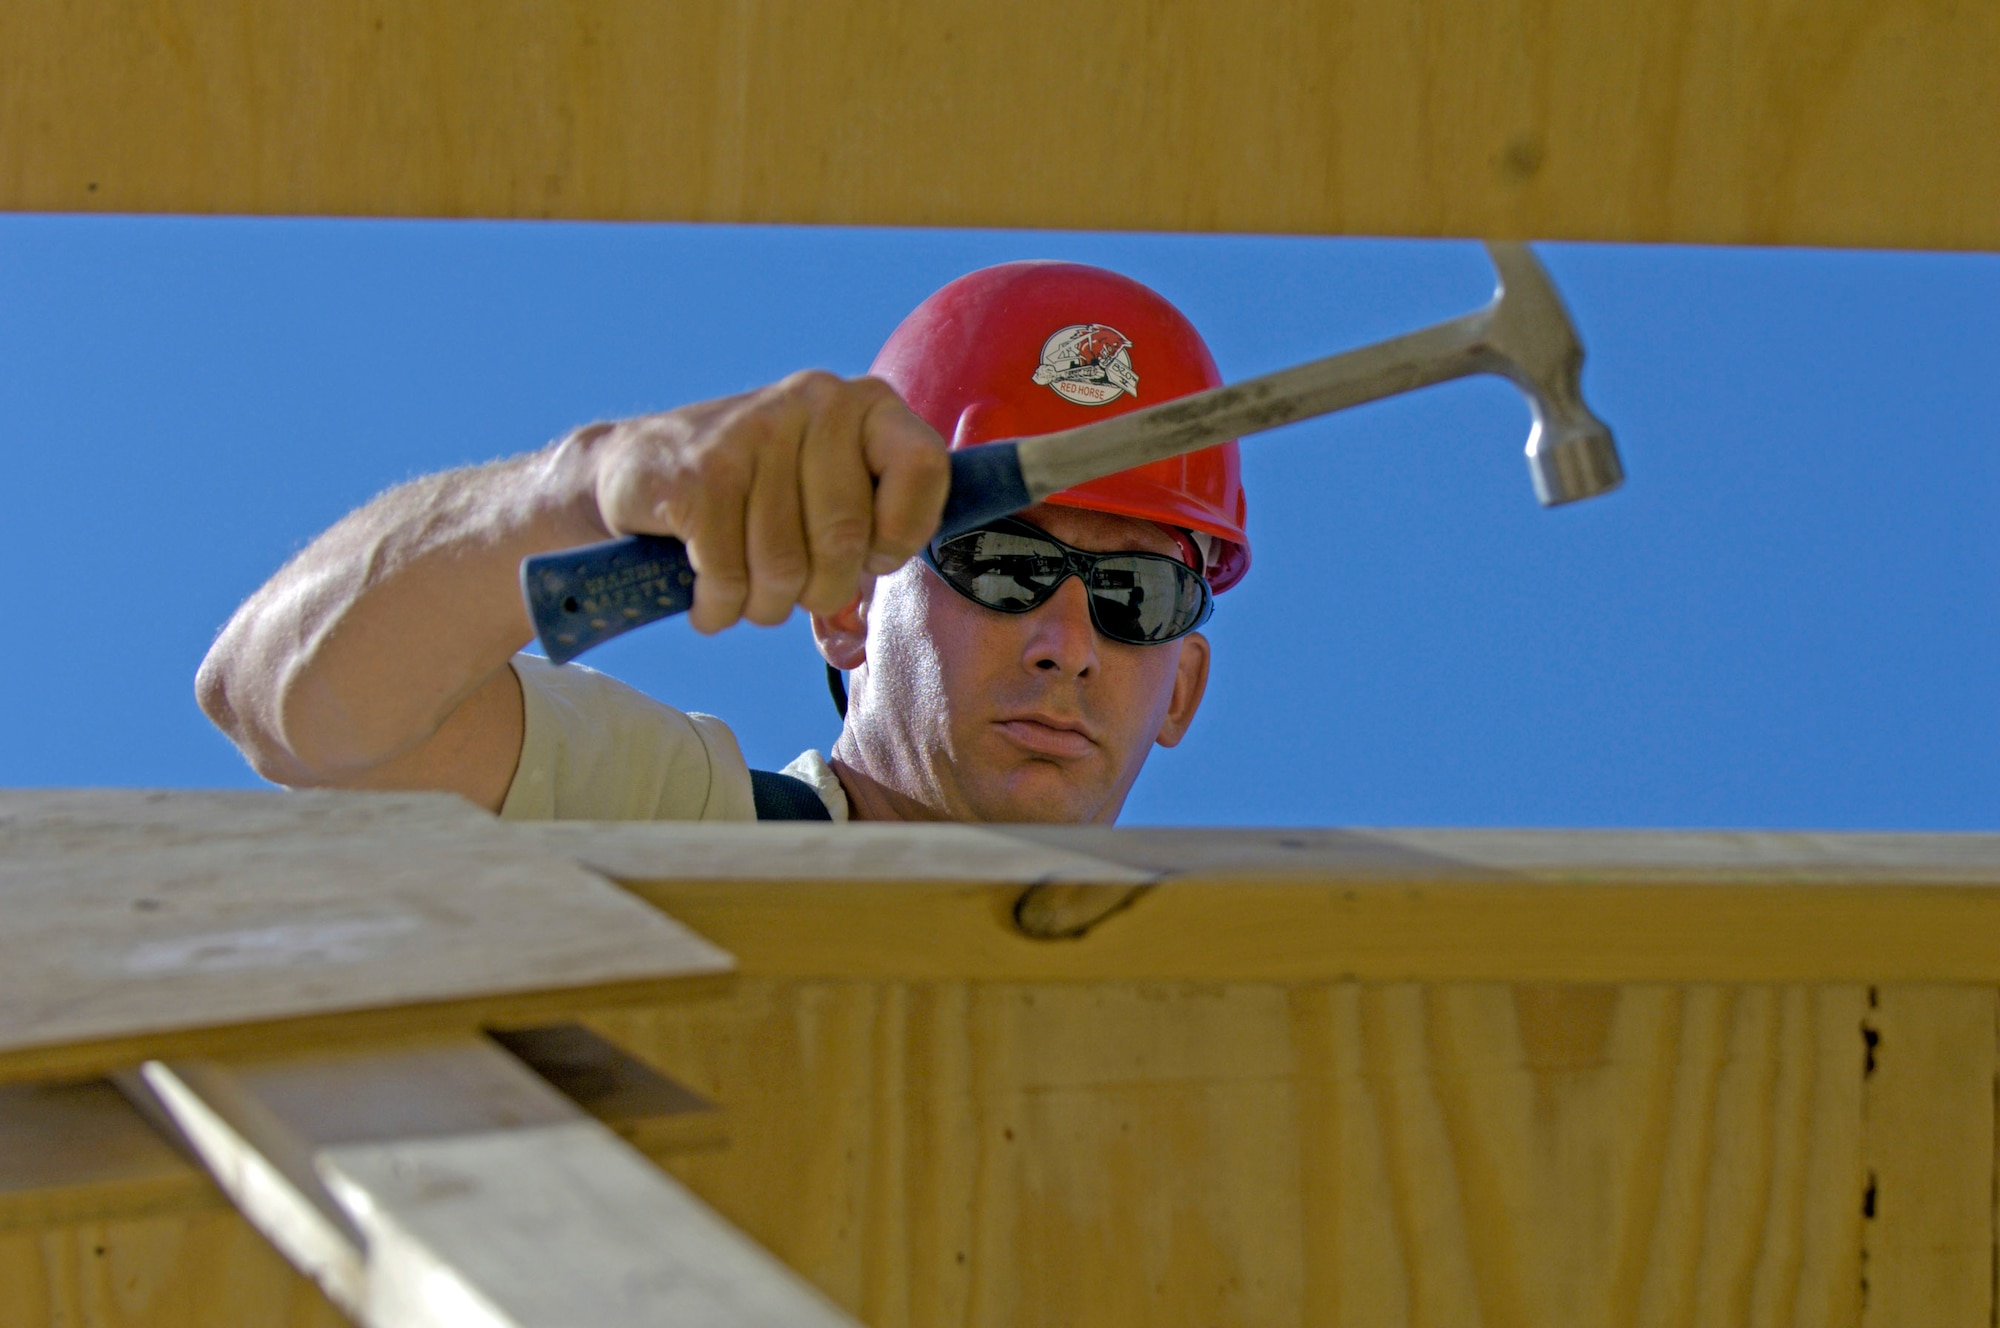 Tech. Sgt. Chris Belknap adjusts the spacing between roof trusses June 22 at at Forward Operating Base Kalsu, Iraq. Sergeant Belknap is the site foreman with the 557th Expeditionary RED HORSE Squadron, one of the Rapid Engineer Deployable Heavy Operational Repair Squadron Engineers, or RED HORSE, Airmen who are forward deployed from Balad Air Base, Iraq and tasked to build four tactical operations centers for the Army's 2nd Brigade combat team, 3rd Infantry Division headquartered here. The 2/3 ID is currently running operations out of tents. The RED HORSE unit, made up of Air Guard, Reserve and active-duty Airmen, was requested by the Army to come into this "Triangle of Death" location because of their self-suffiency and for the multiple skill sets they bring to a project. (U.S. Air Force photo/Master Sgt. Jim Varhegyi)